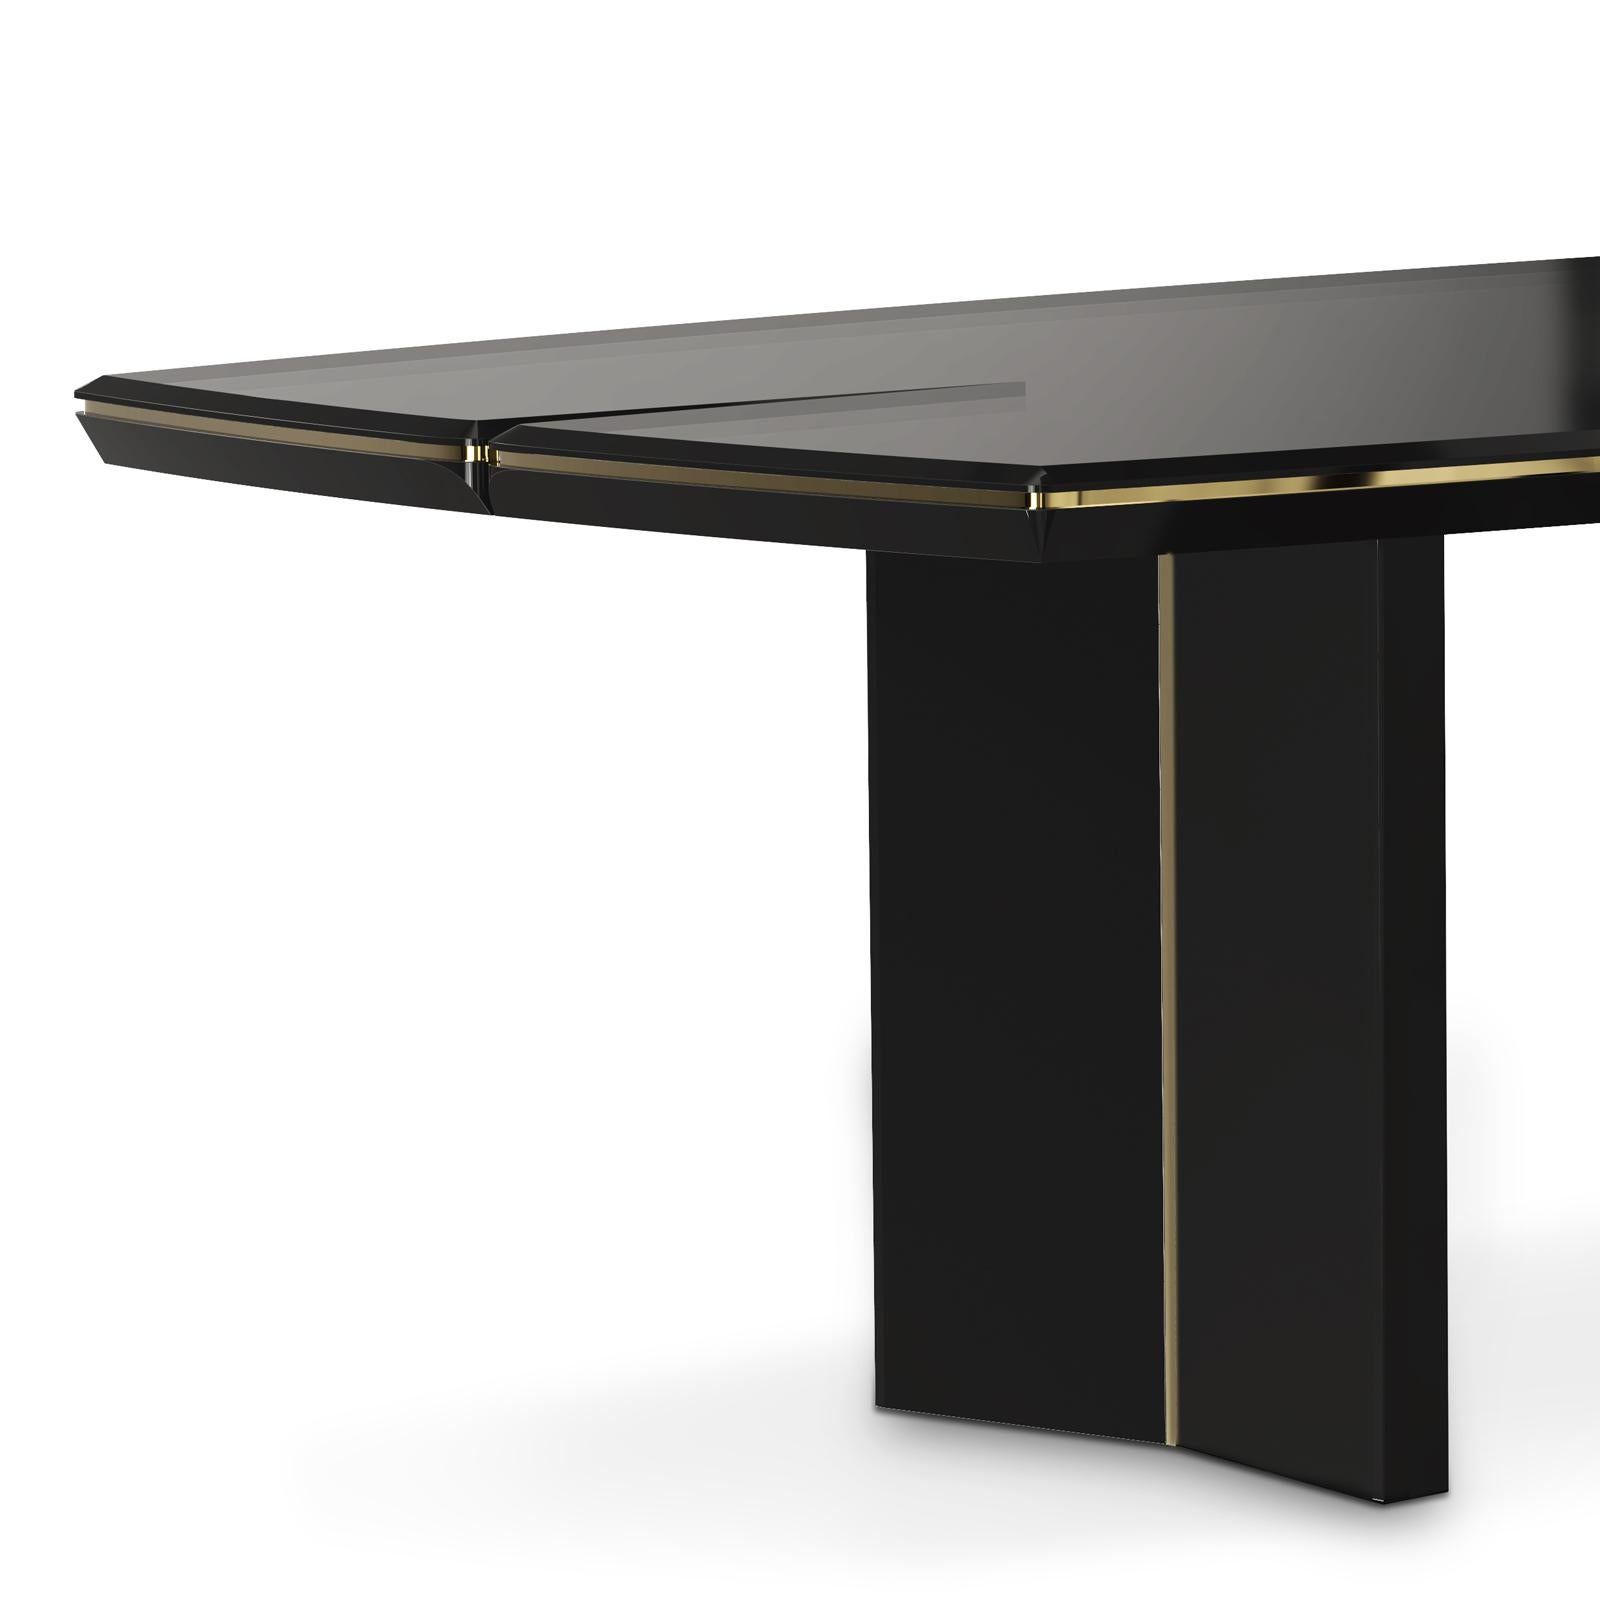 Dining table maxima with wooden black lacquered
top and structure and with gold plated solid polished brass
trim. With gold plated solid polished brass on base.
Also available in maxima console table.